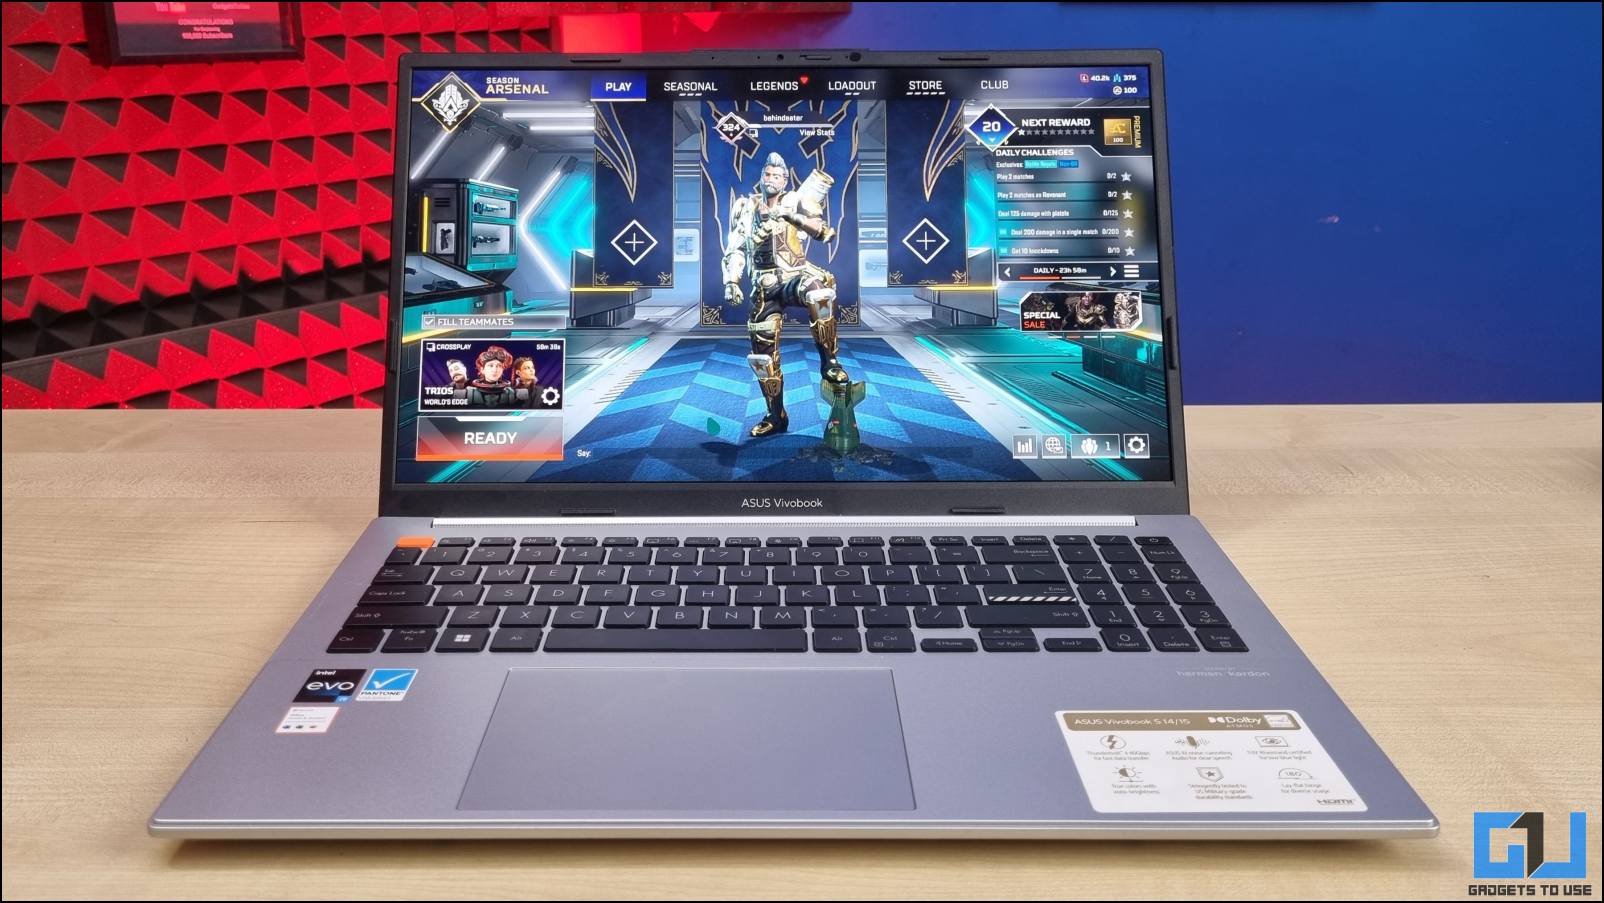 ASUS Vivobook S15 OLED Review